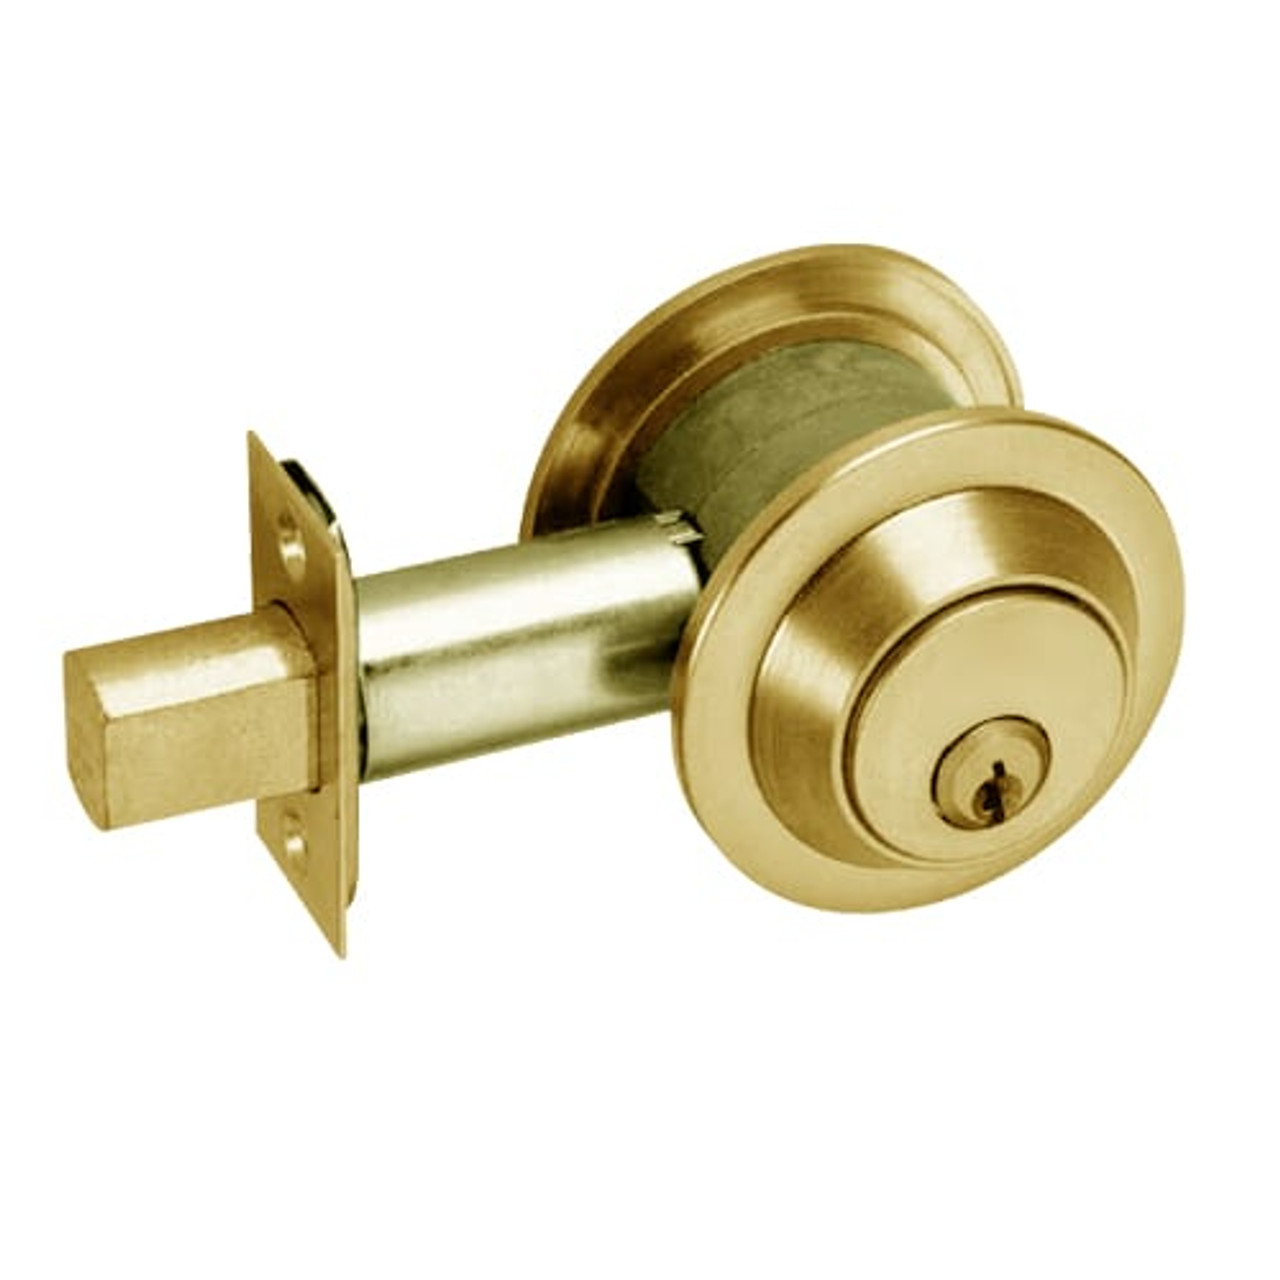 DL3013-605 Corbin DL3000 Series Cylindrical Deadlocks with Single Cylinder in Bright Brass Finish